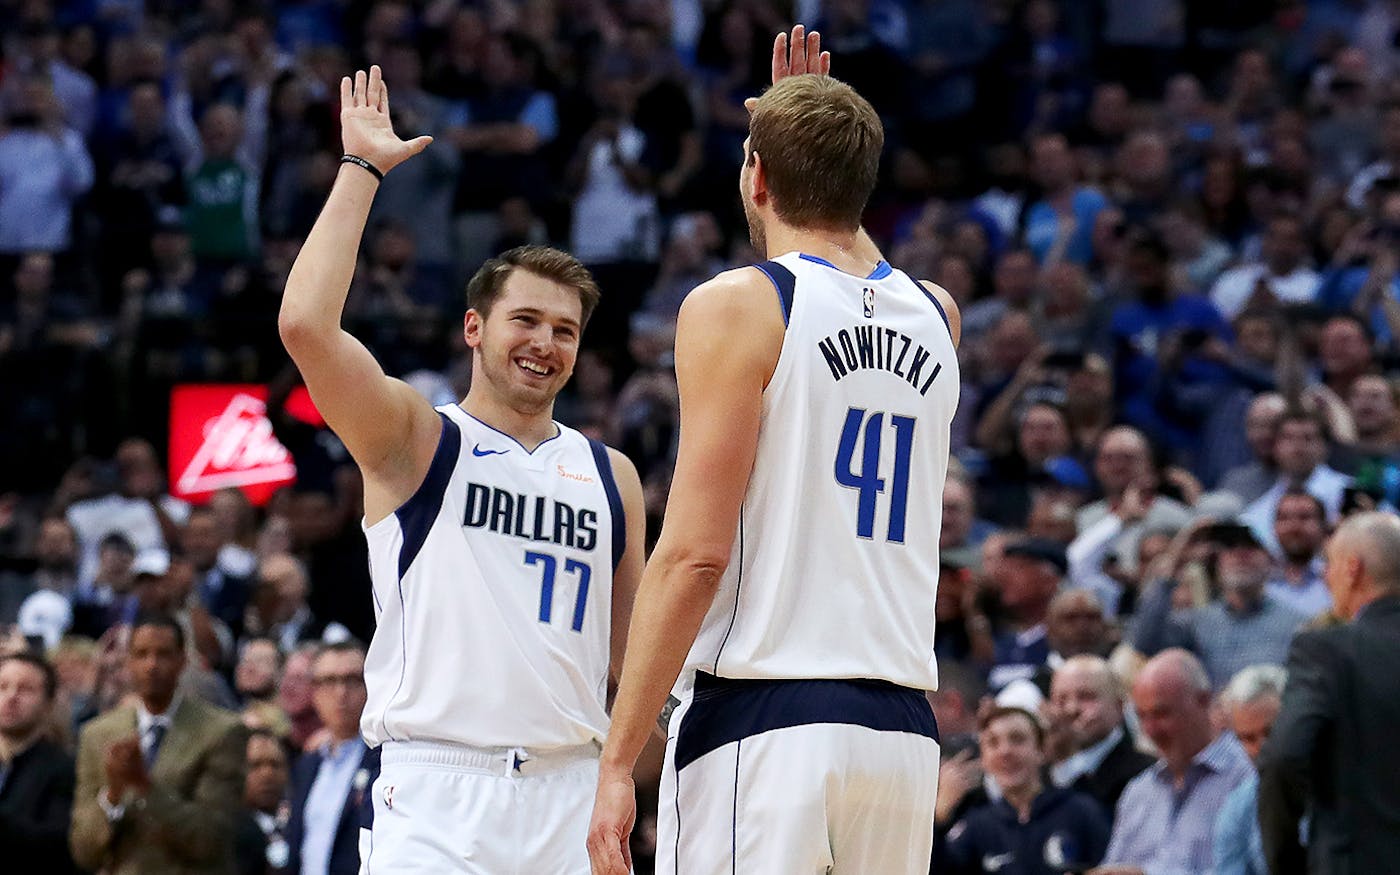 The Dallas Mavericks Are Now Luka Doncic's Team. Is He Ready